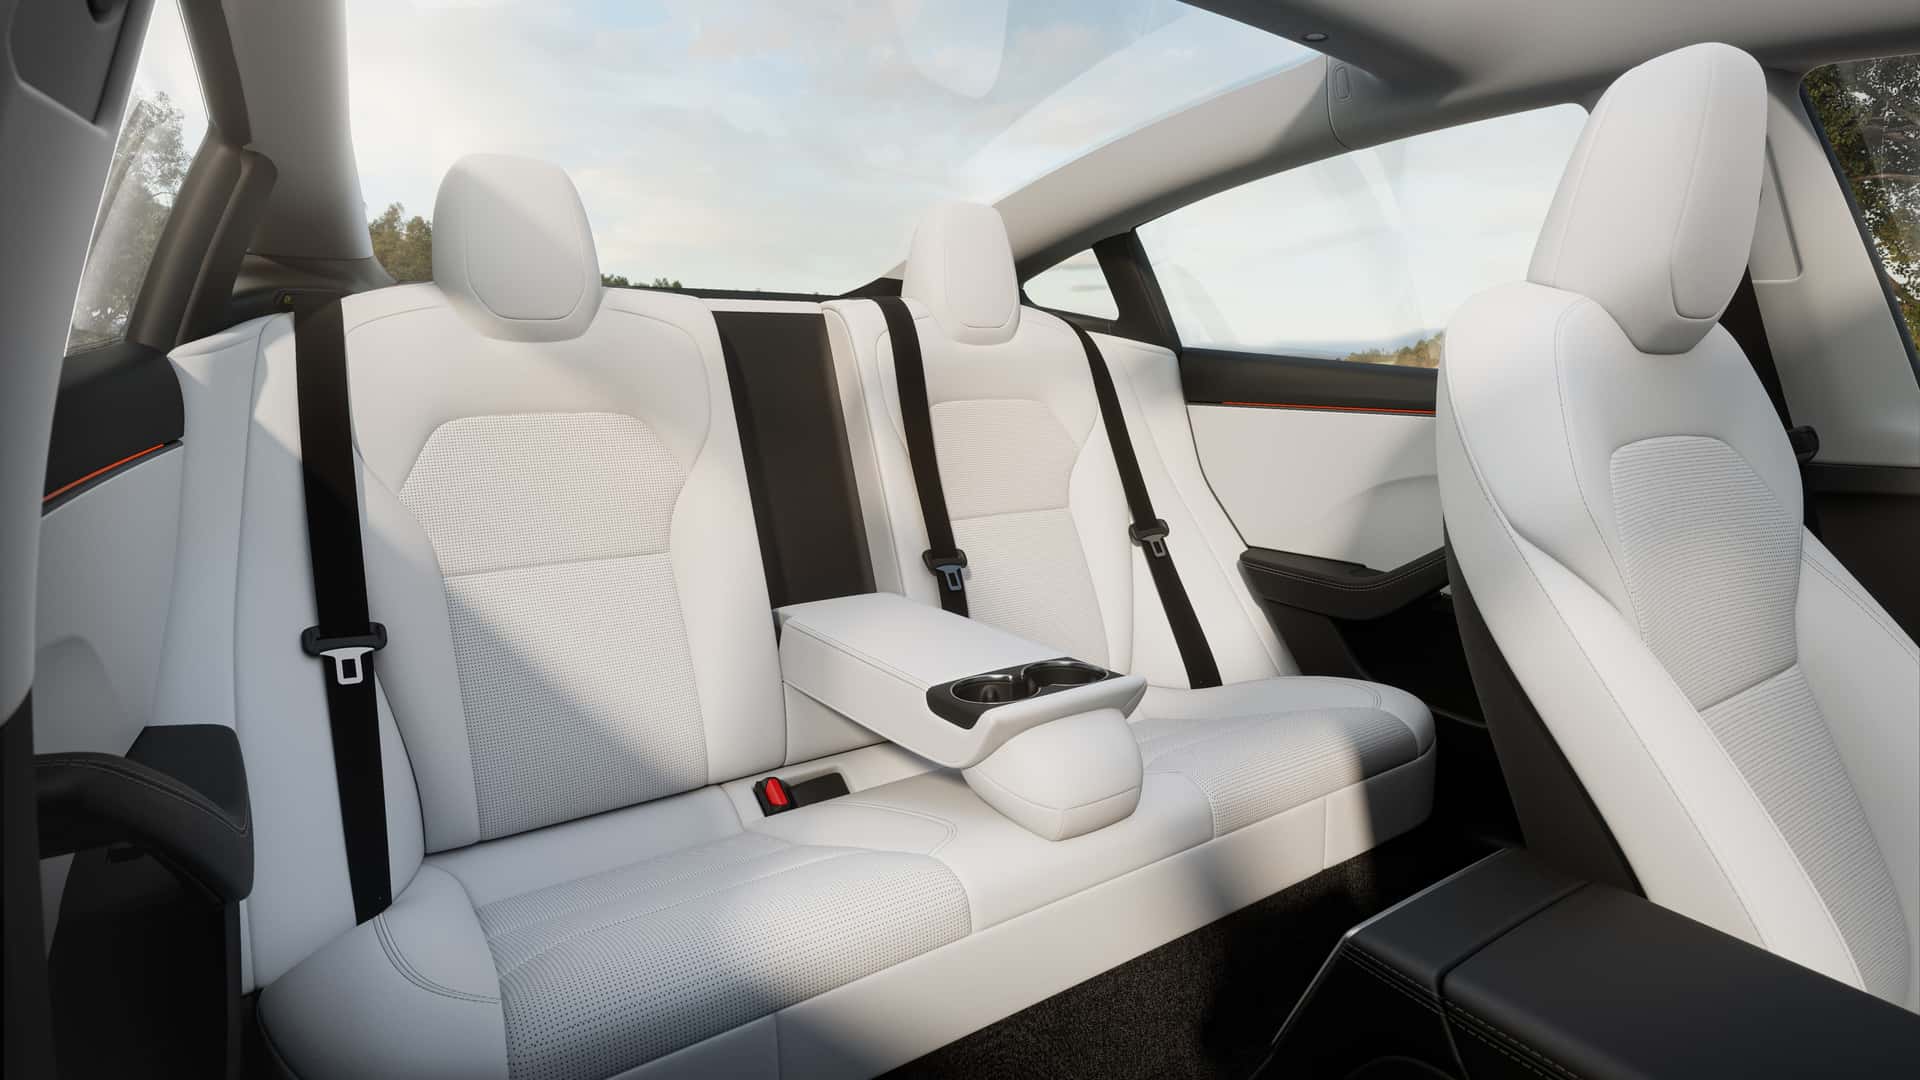 tesla could be preparing to software lock heated seats behind paywall